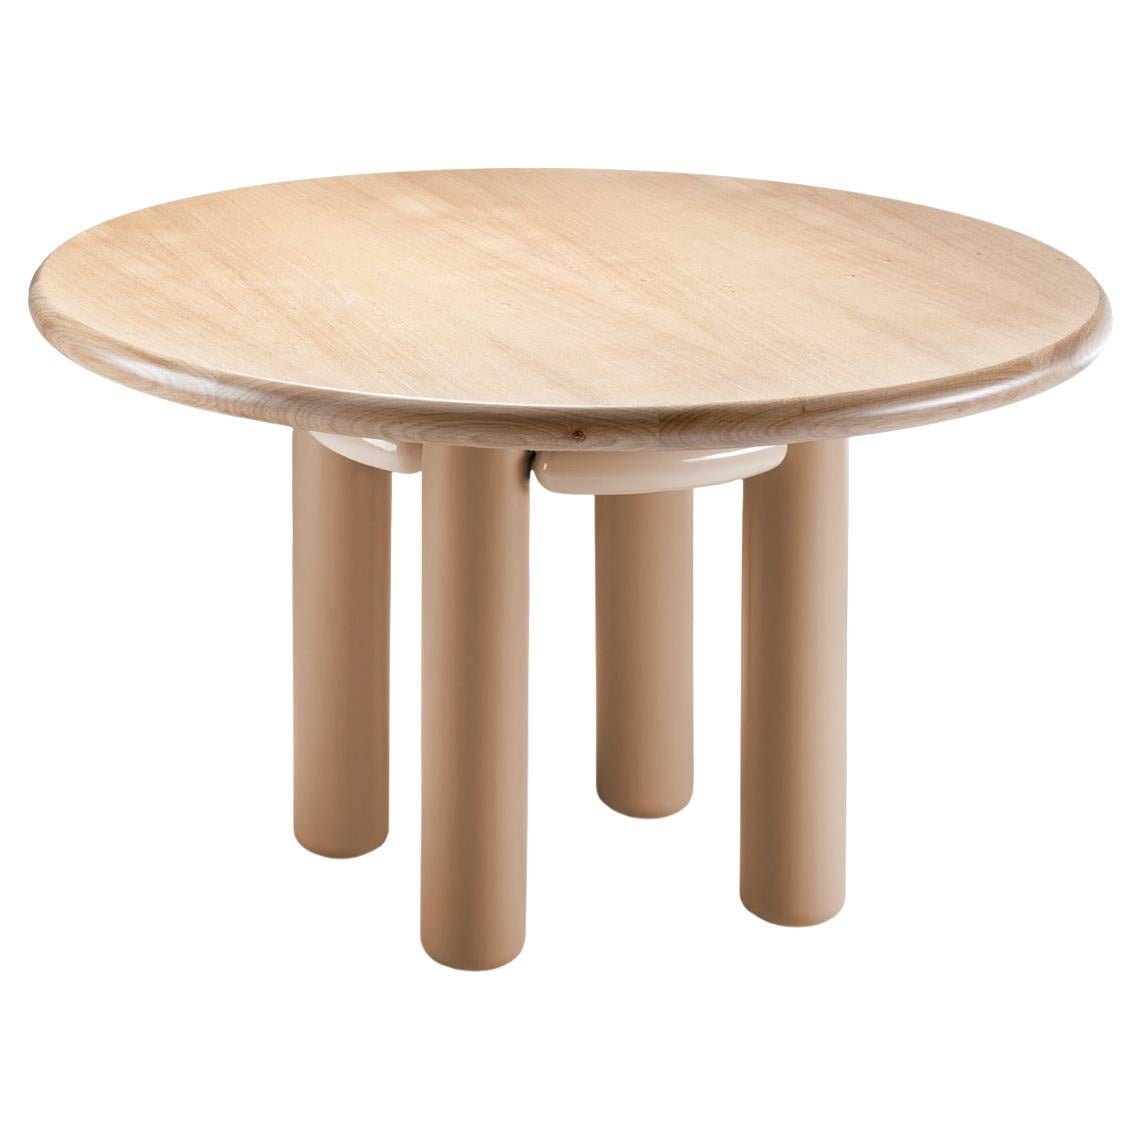 Kai Dinner Table, Powder Lacquered Wood Feet, Oak Top and Salmon Steel Structure